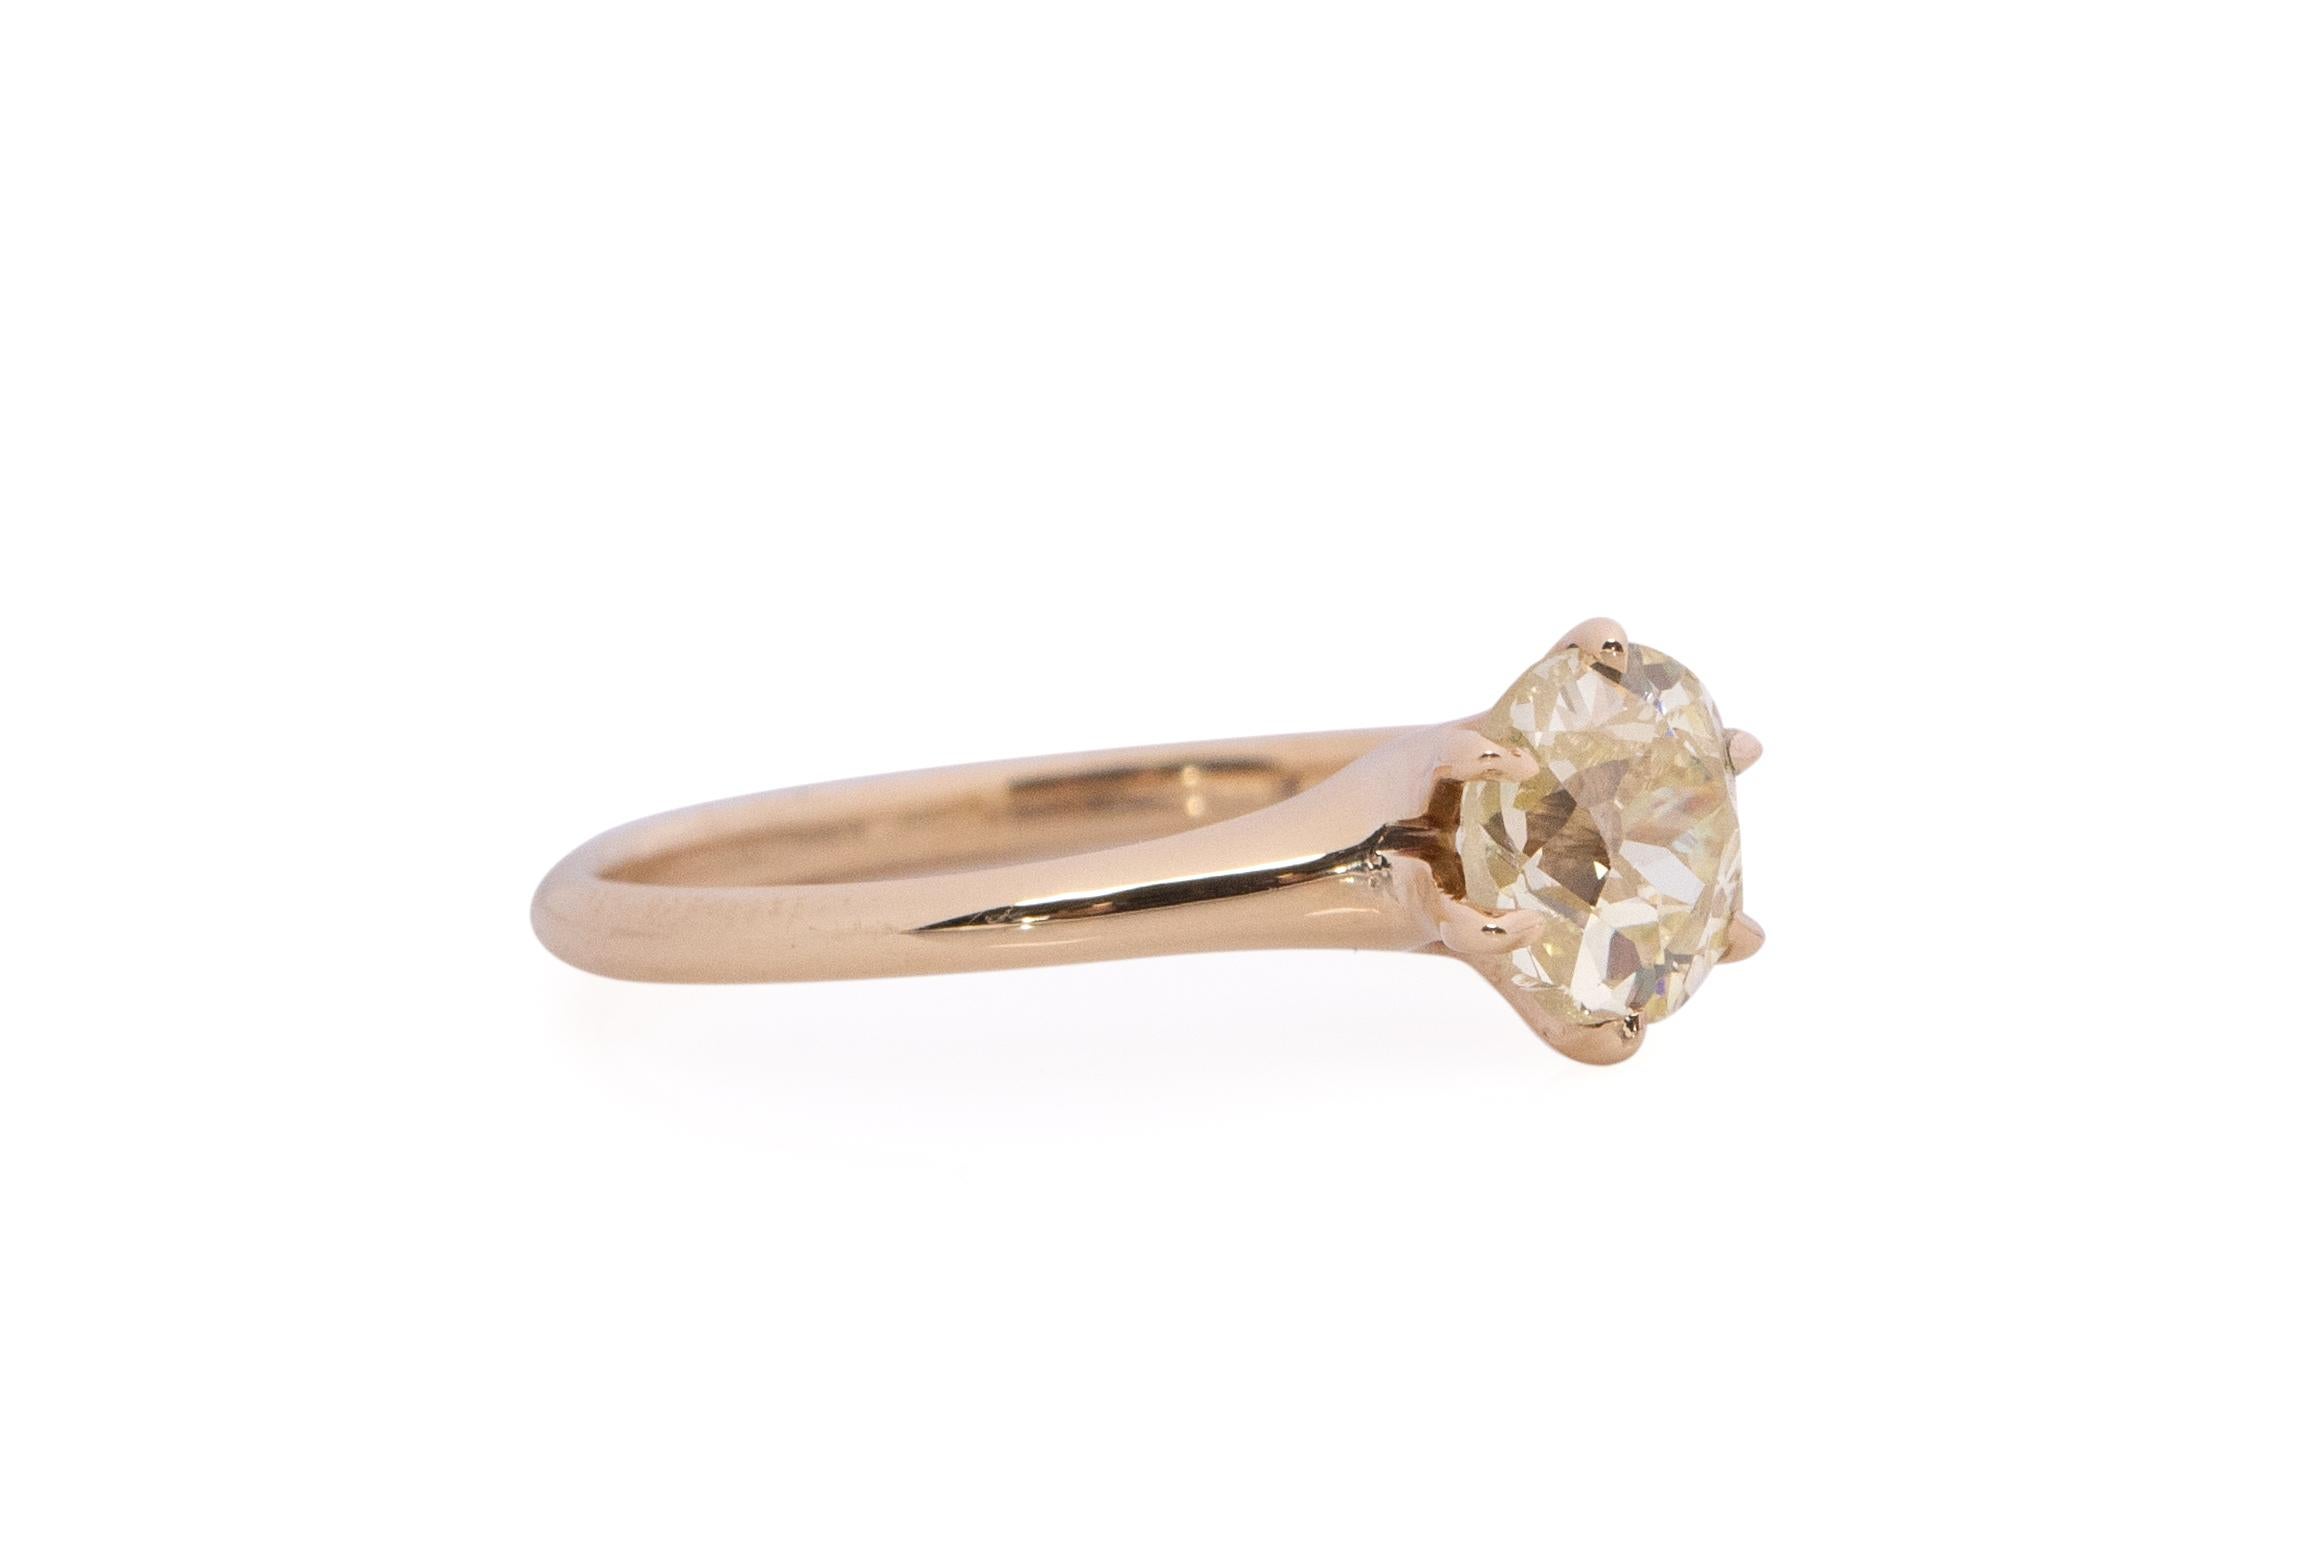 Item Details: 
Ring Size: 6
Metal Type: 14karat Yellow Gold [Hallmarked, and Tested]
Weight: 2.2 grams

Center Diamond Details:
GIA REPORT #: 2203841479
Weight: .85 carat
Cut: Antique Cushion
Color: Light Yellow (Y-Z)
Clarity: SI1
Measurements: